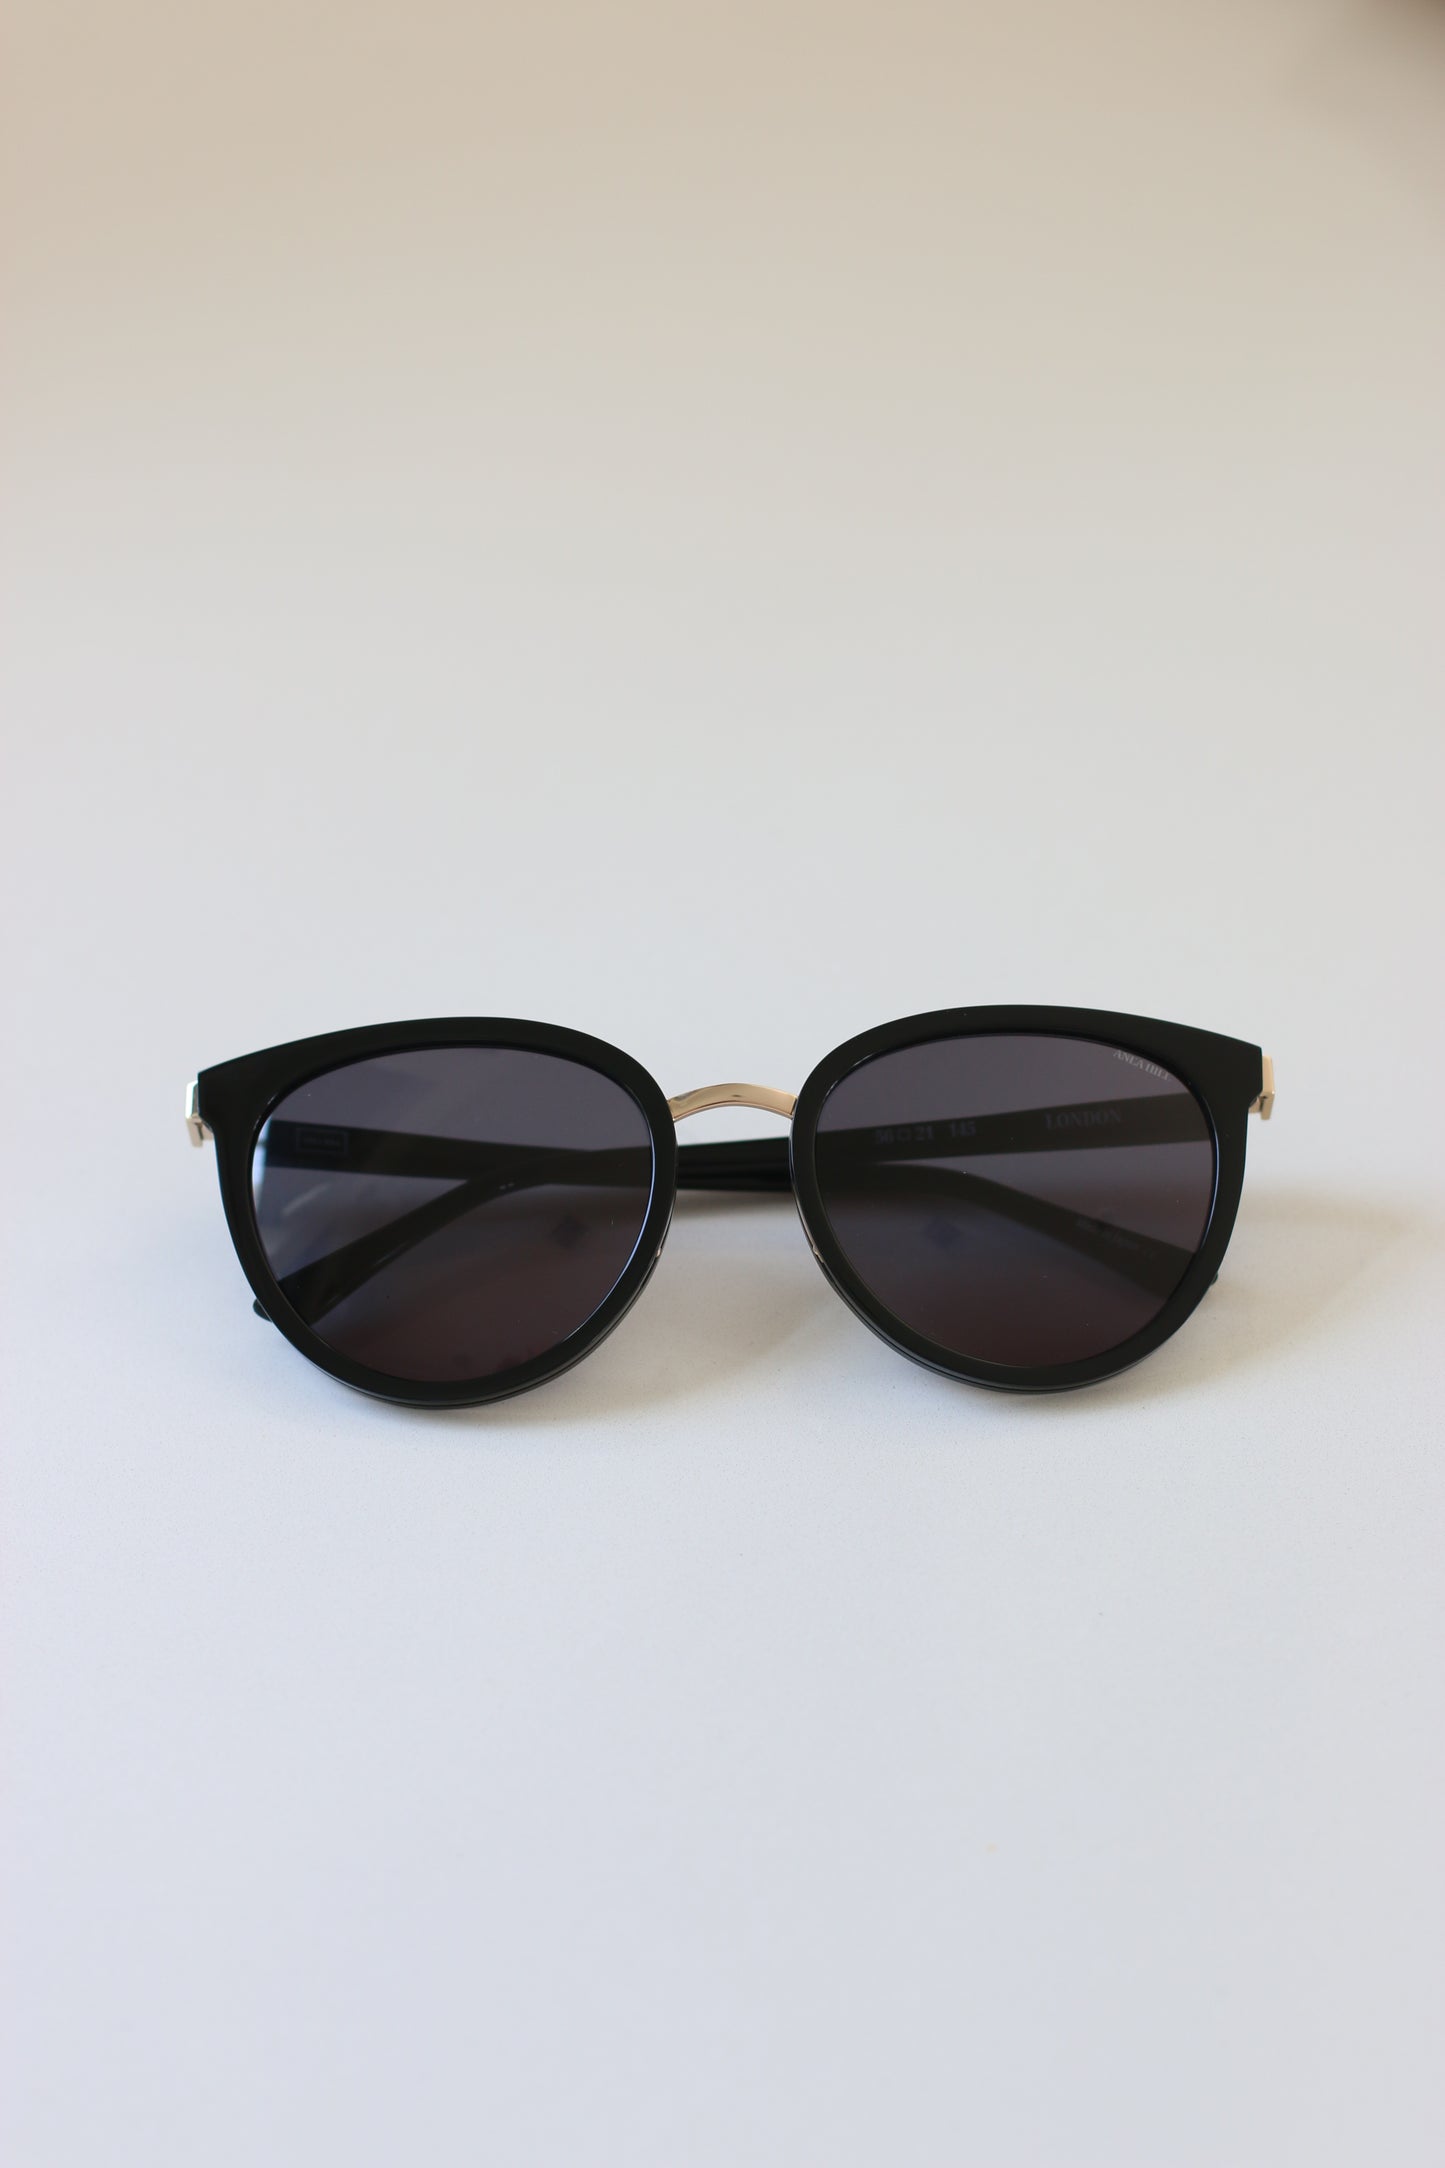 A classic and timeless pair of luxury sunglasses from London with a black frame and grey tinted lenses.